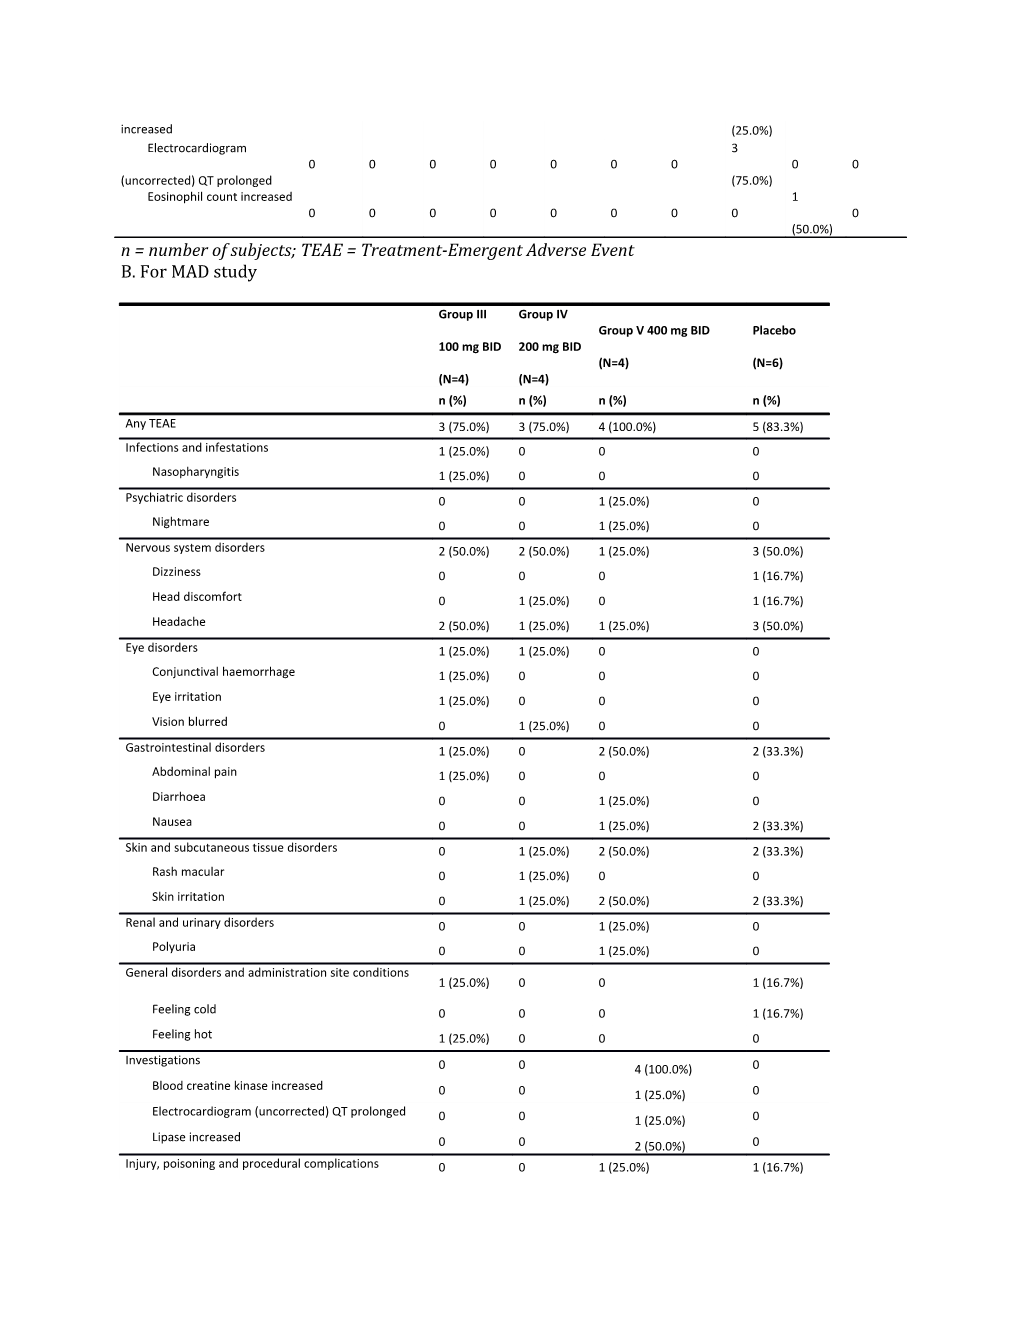 Table S1. Summary of Treatment-Emergent Adverse Events by System Organ Class and Preferred